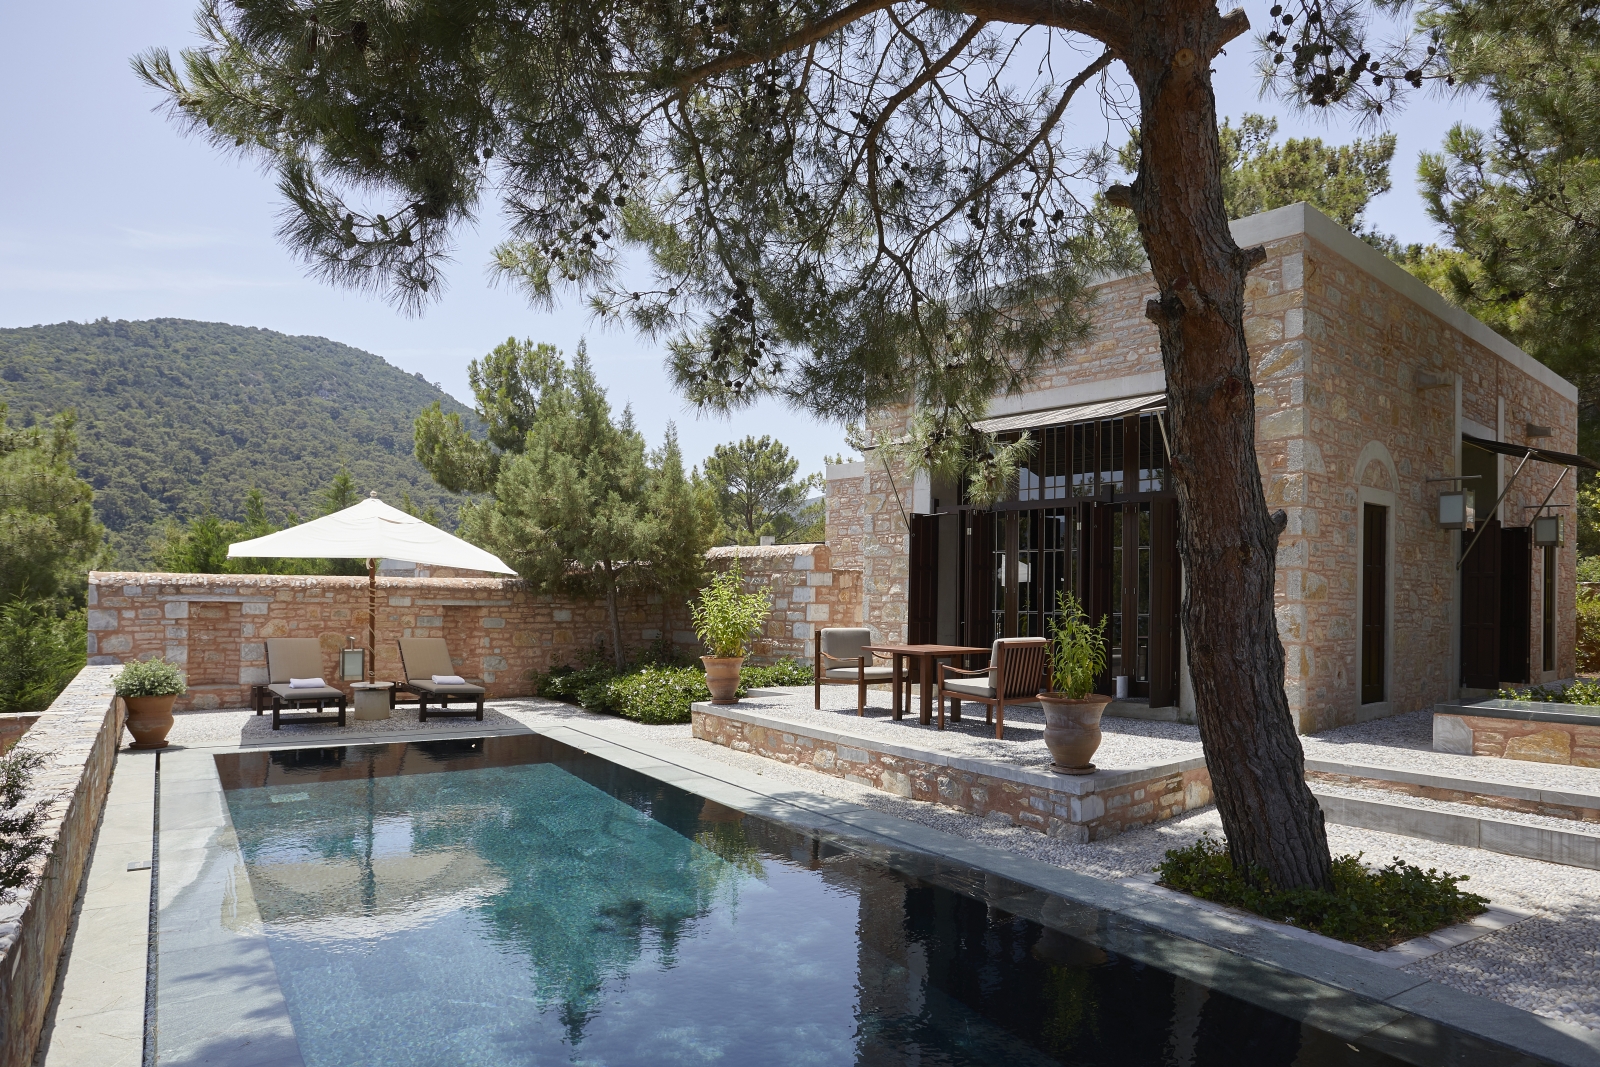 Exterior of a Garden View Pool Pavilion at luxury hotel Amanruya, Turkey, with terrace seating and loungers by the pool